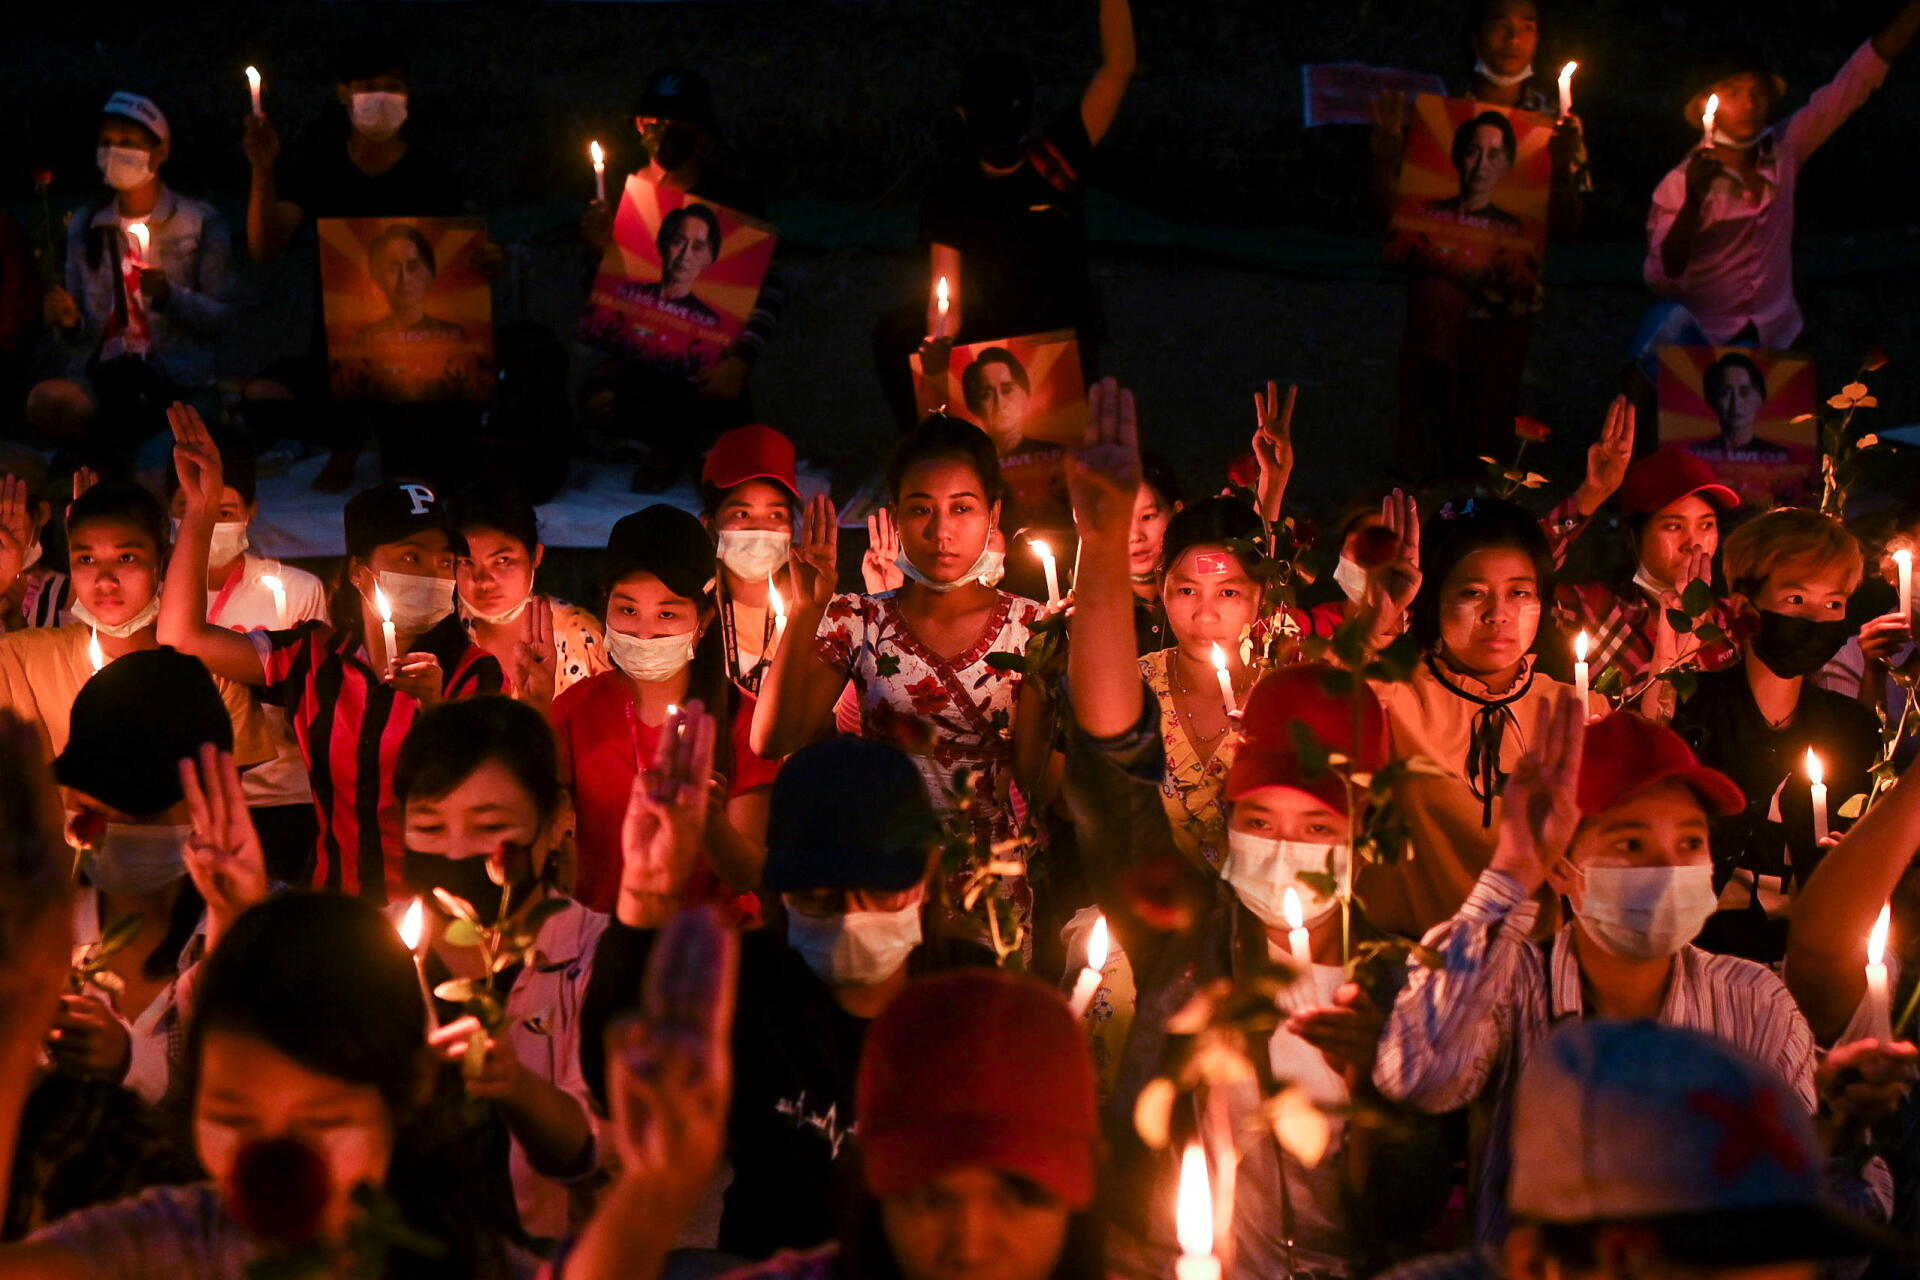 Watch over the victims of the military coup in Rangoon, Burma, on 21 February.